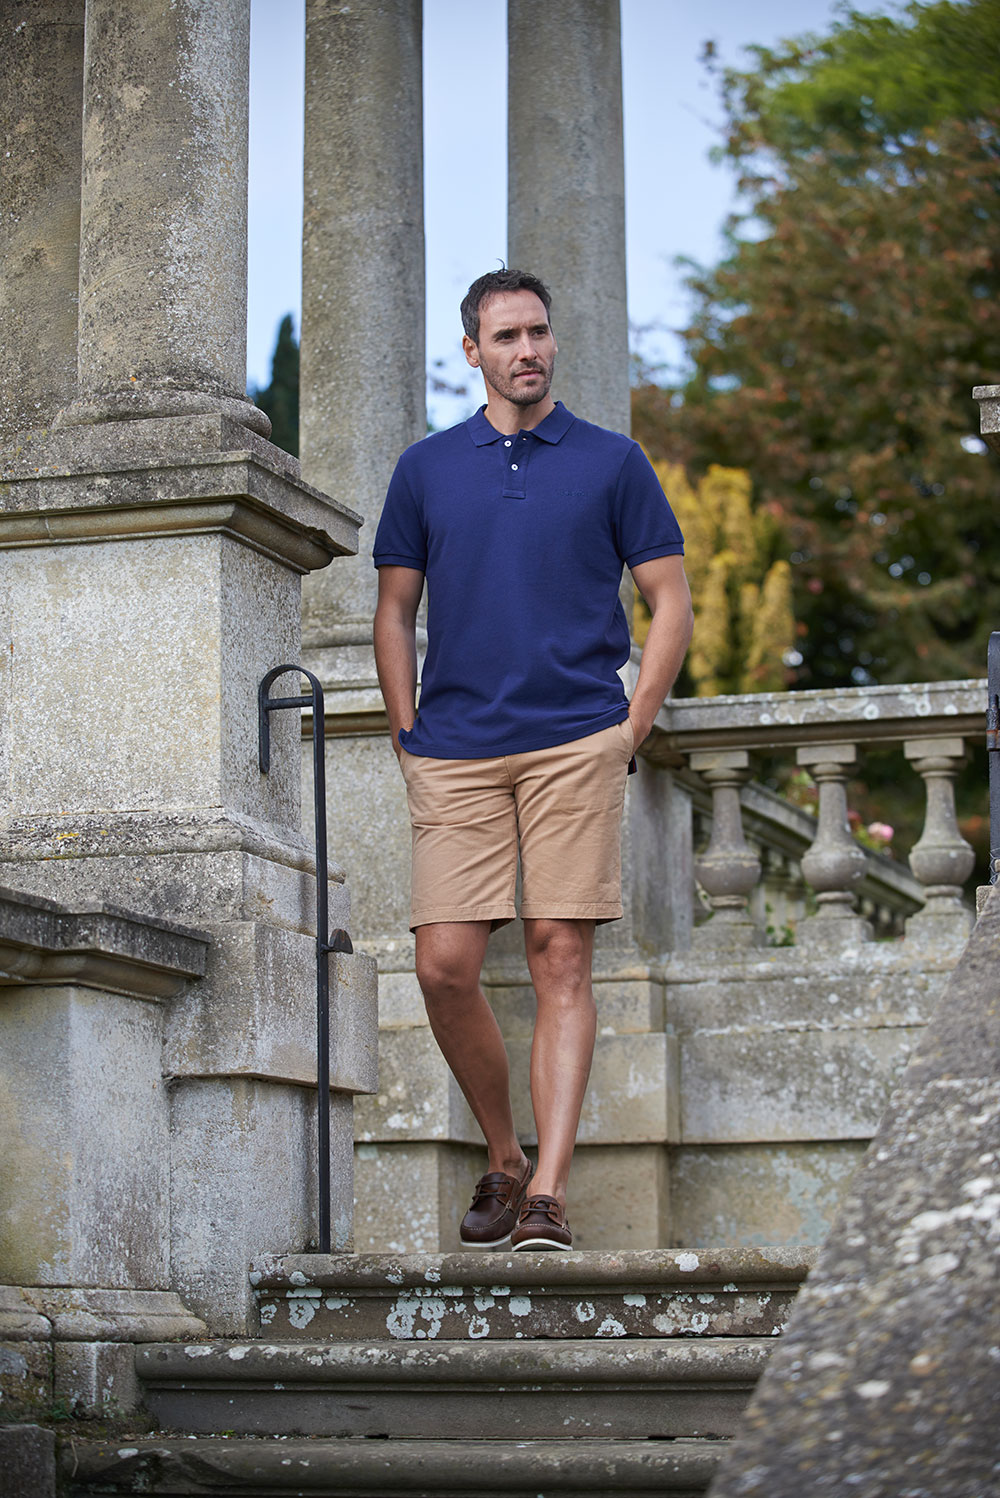 Padstow Polo Shirt for Him